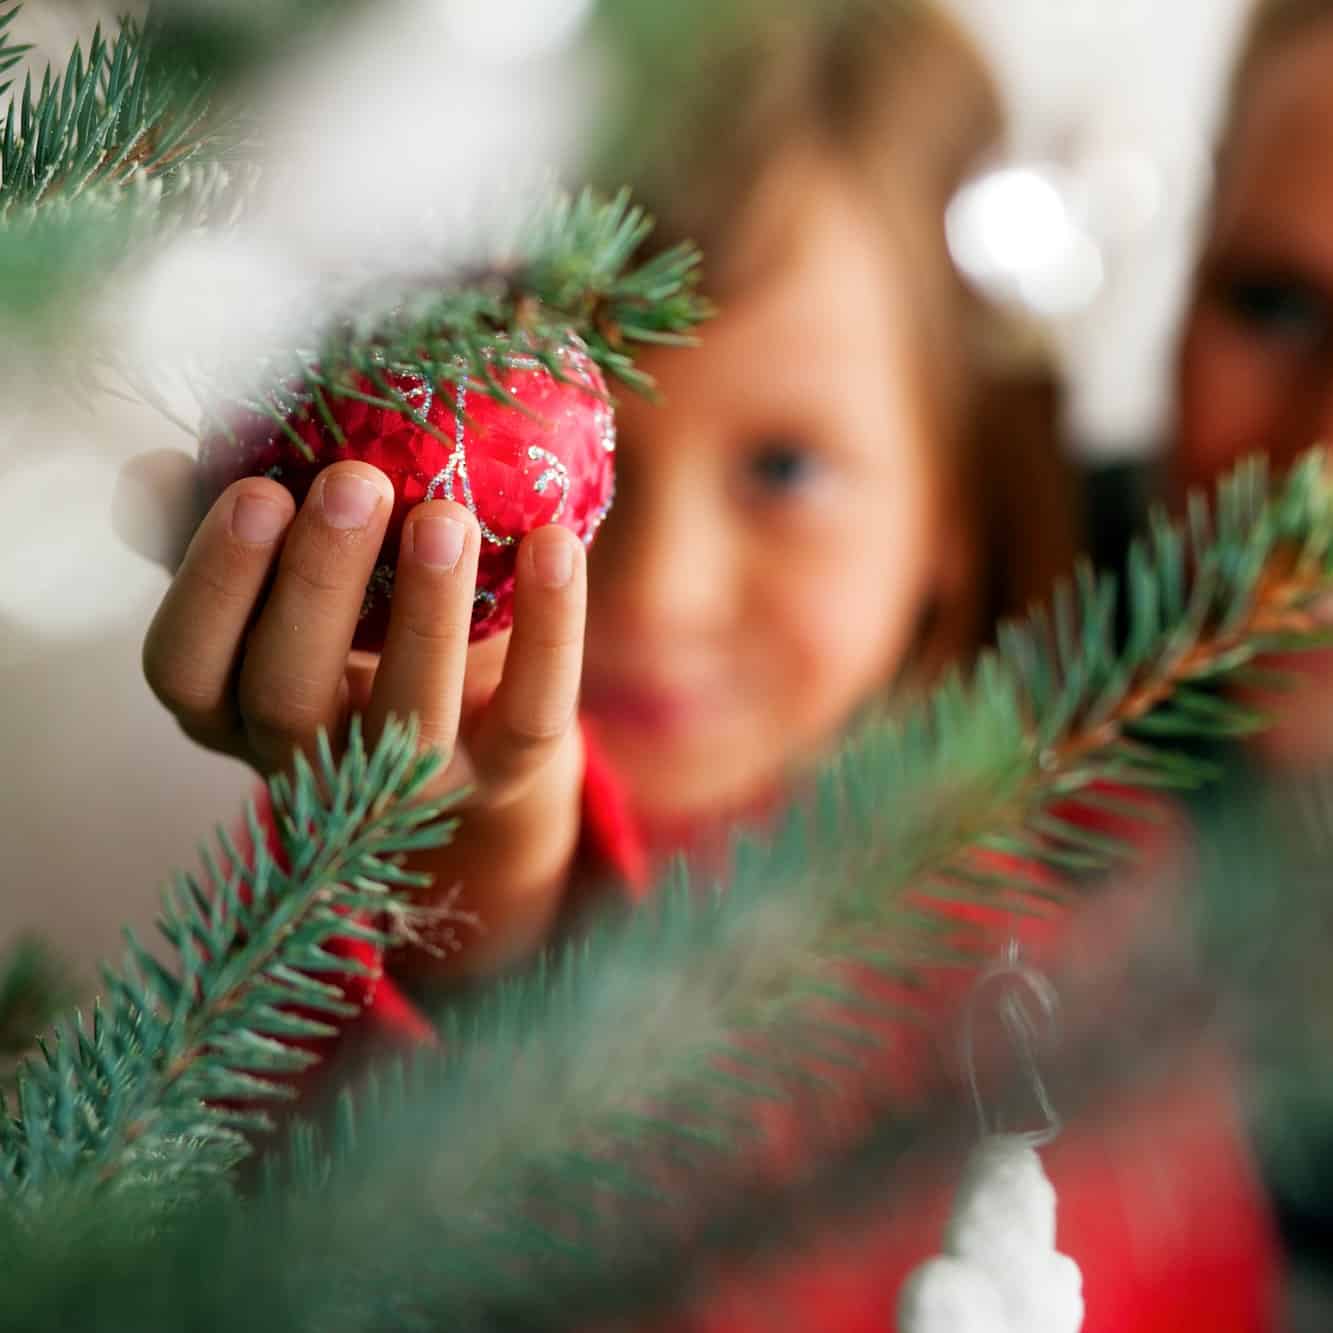 A little girl holding a red ornament near a Christmas tree.